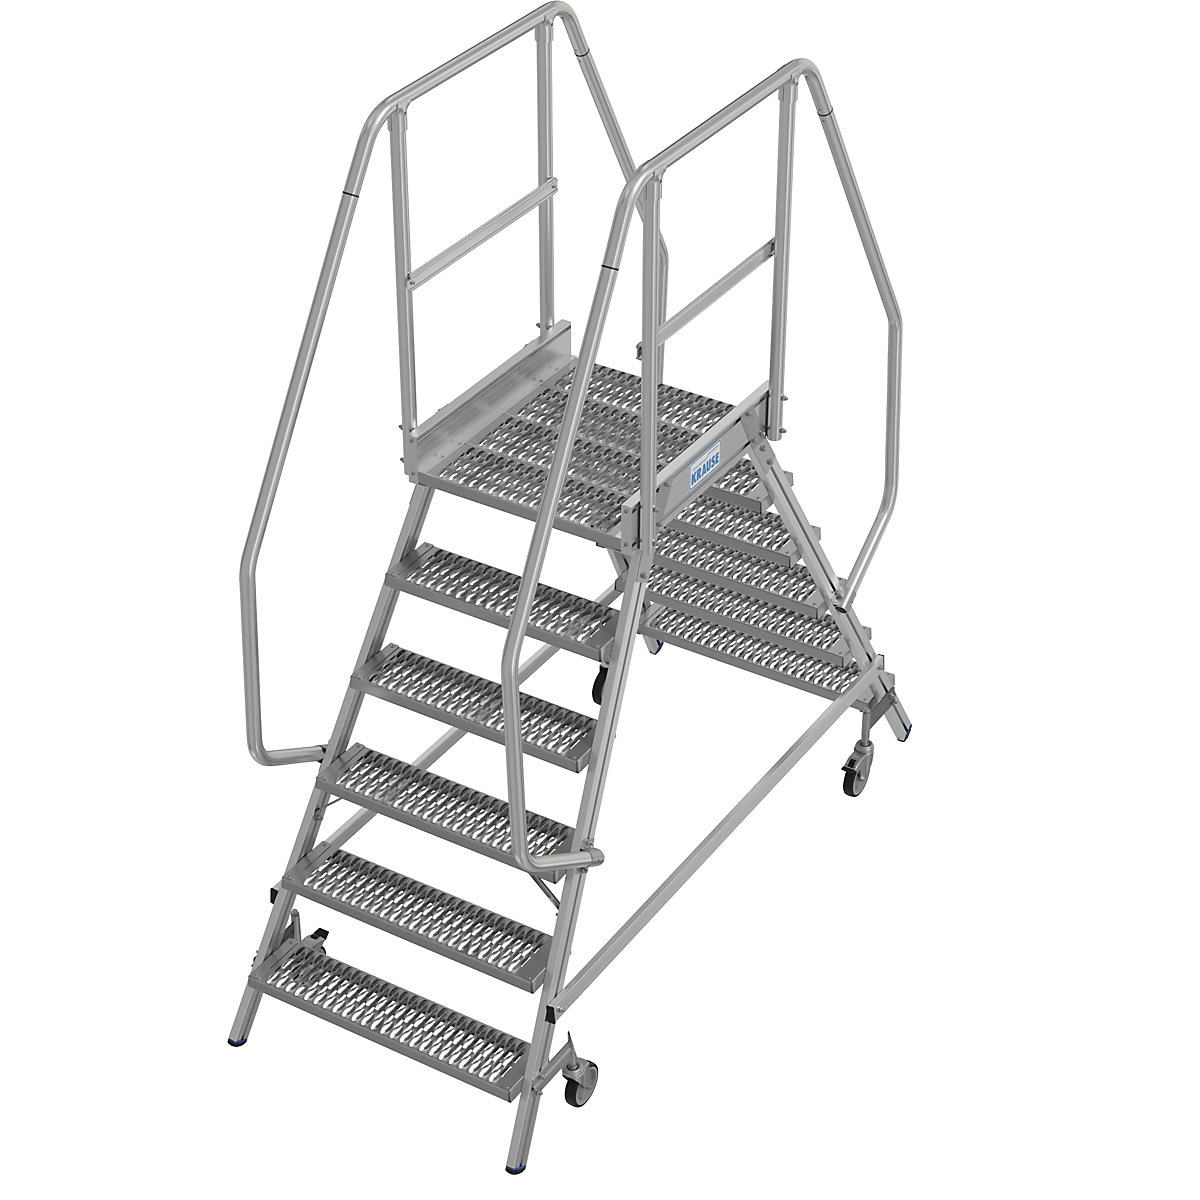 Mobile safety steps with R13 anti-slip properties – KRAUSE, with double sided access, 2x6 steps incl. platform-4